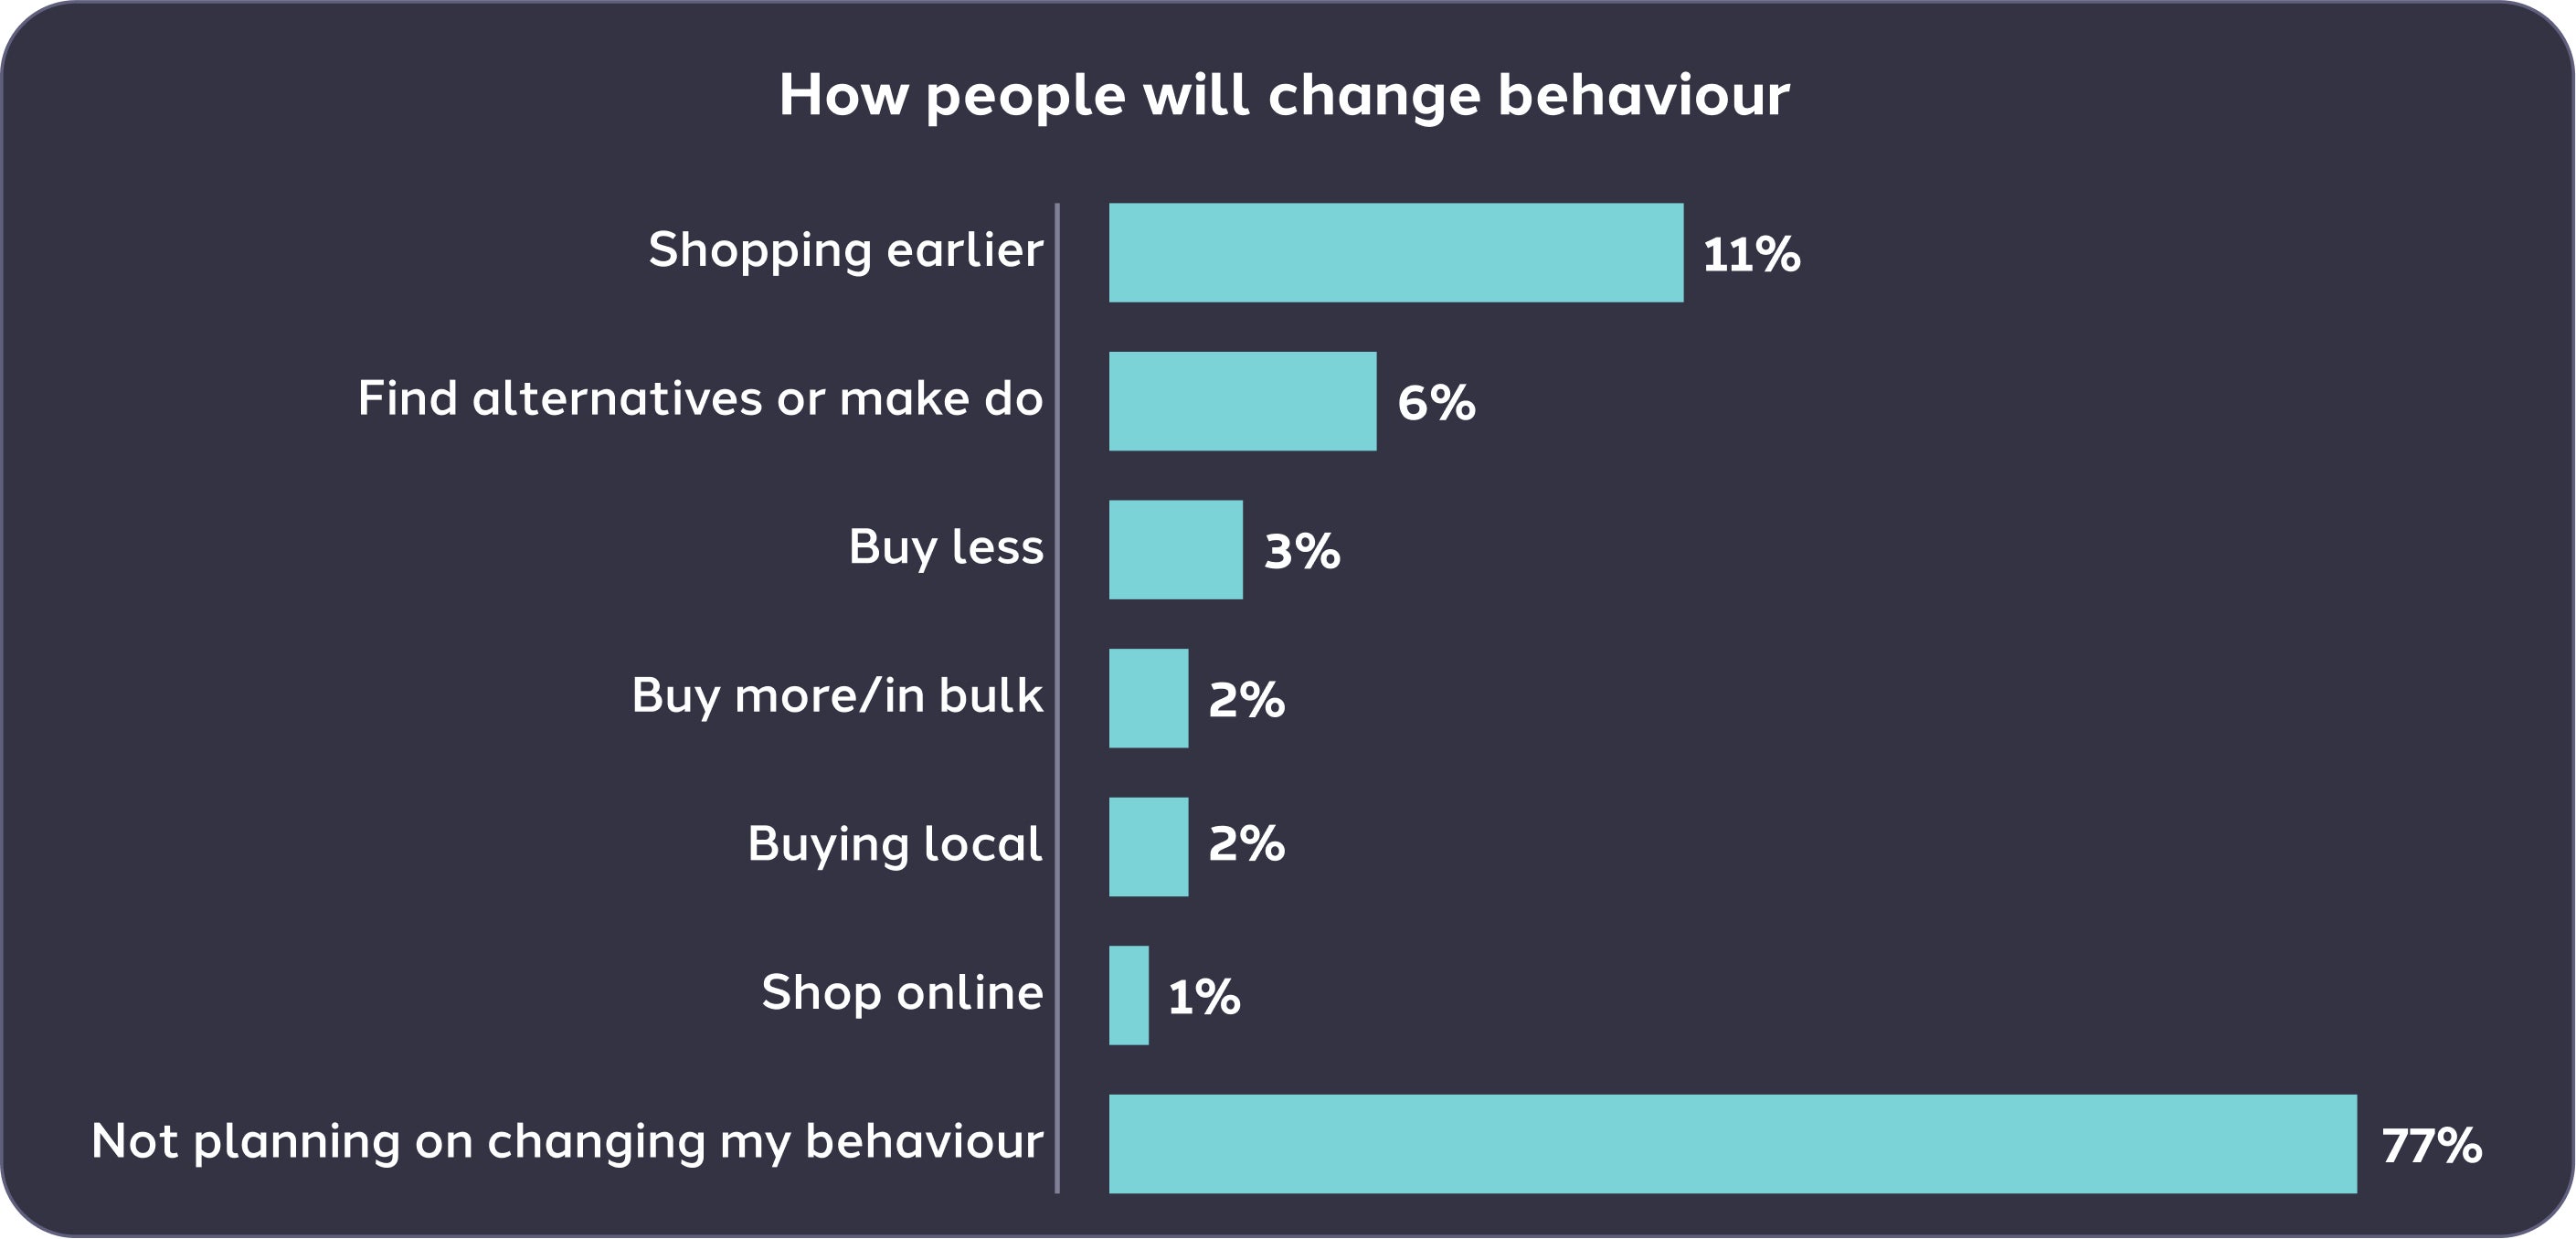 Graph-showing-how-people-will-change-their-shopping-behaviour-in-respoonse-to-the-supply-chain-issue